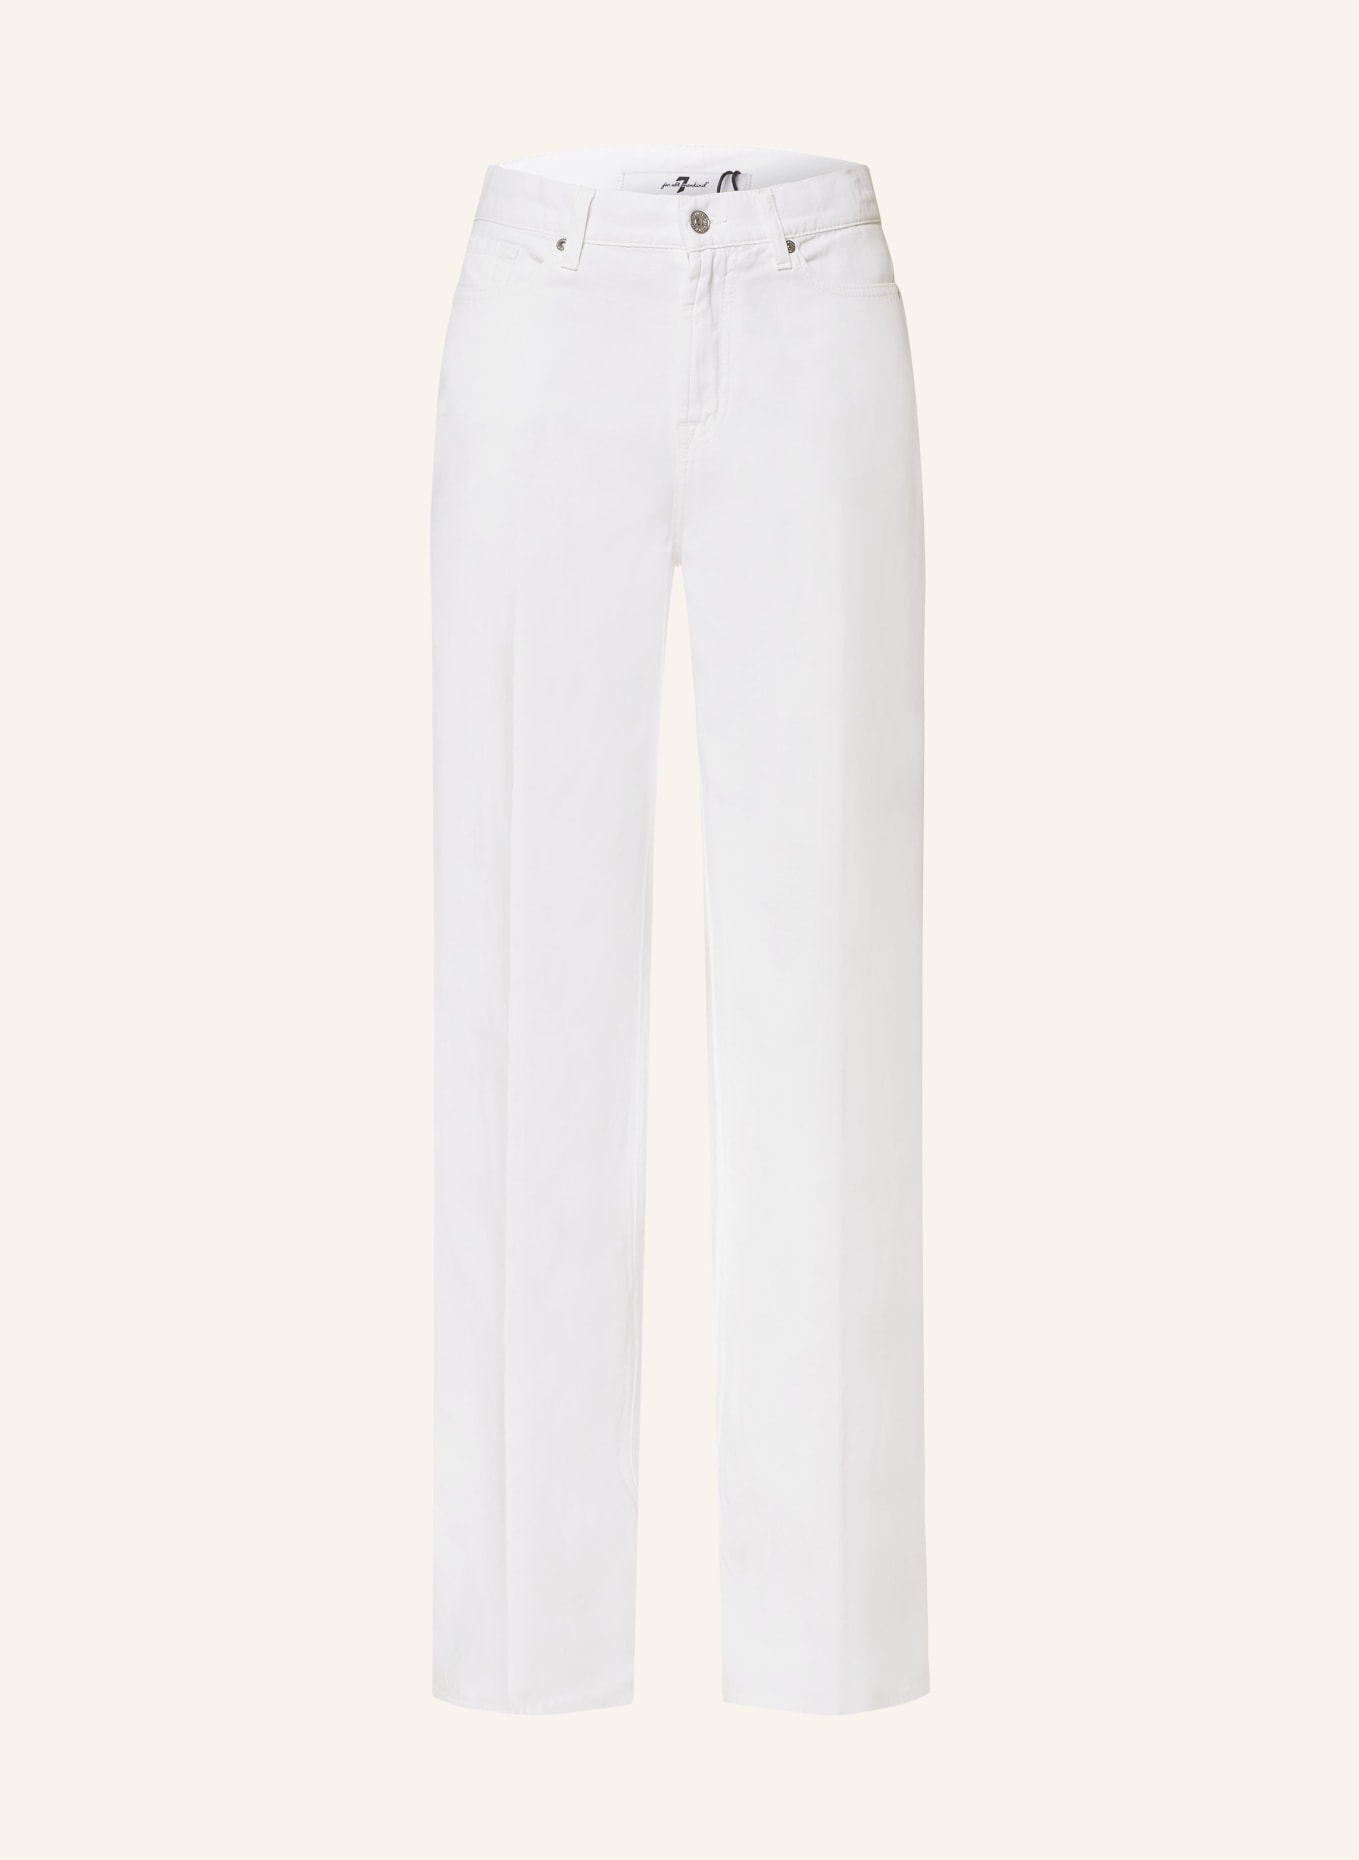 7 for all mankind Flared Jeans LOTTA, Farbe: WEISS (Bild 1)